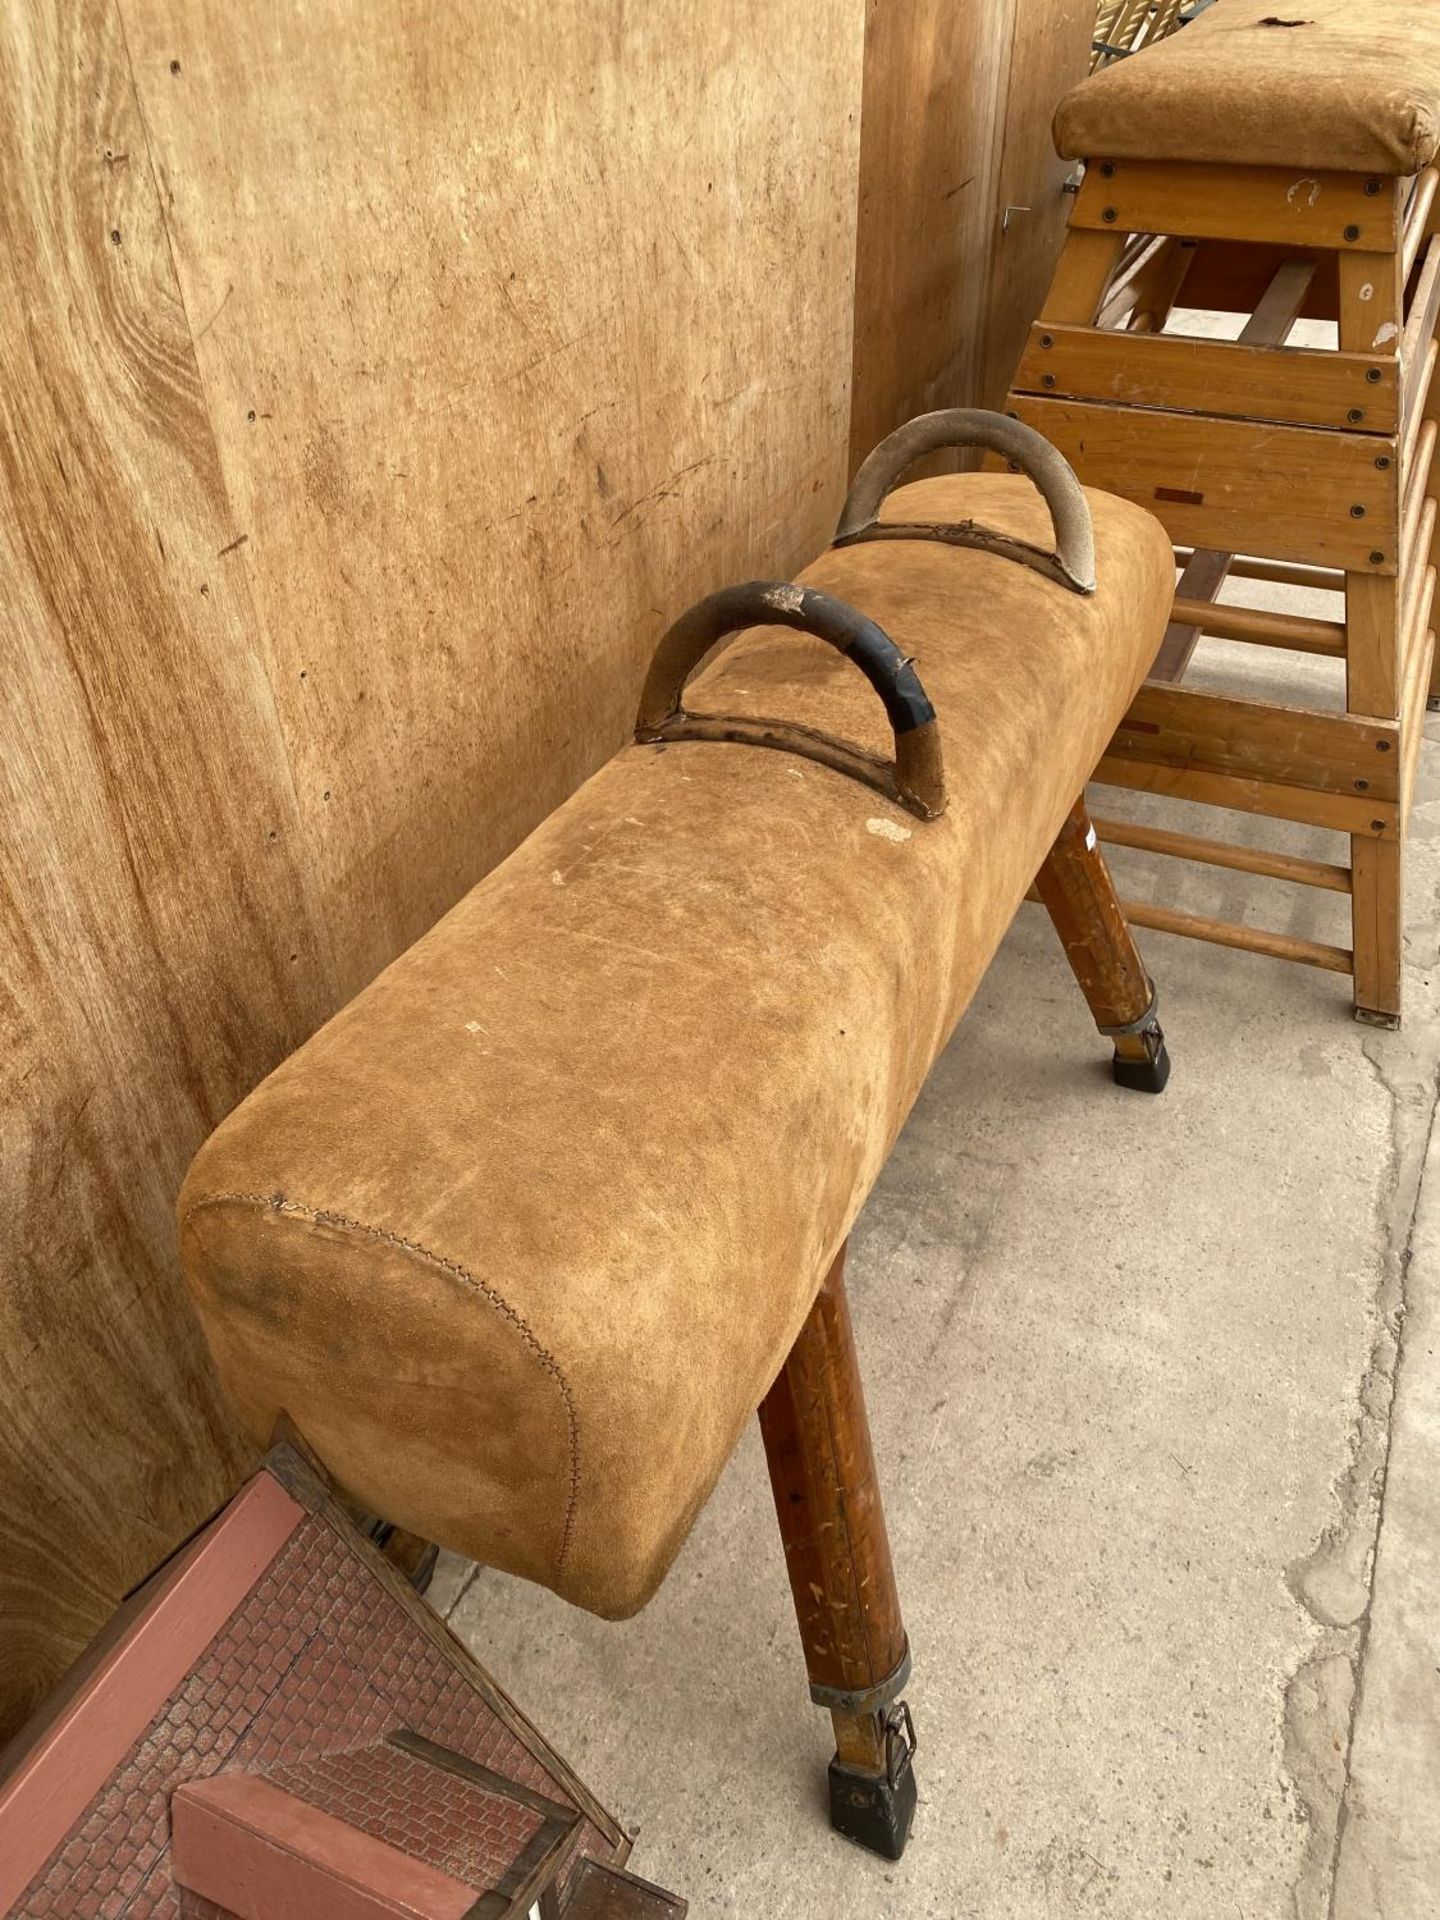 A VINTAGE POMMEL HORSE WITH HOOP BARS, ON FOUR ADJUSTABLE LEGS, 65X24" MAX WITH SUEDE TOP - Image 4 of 4